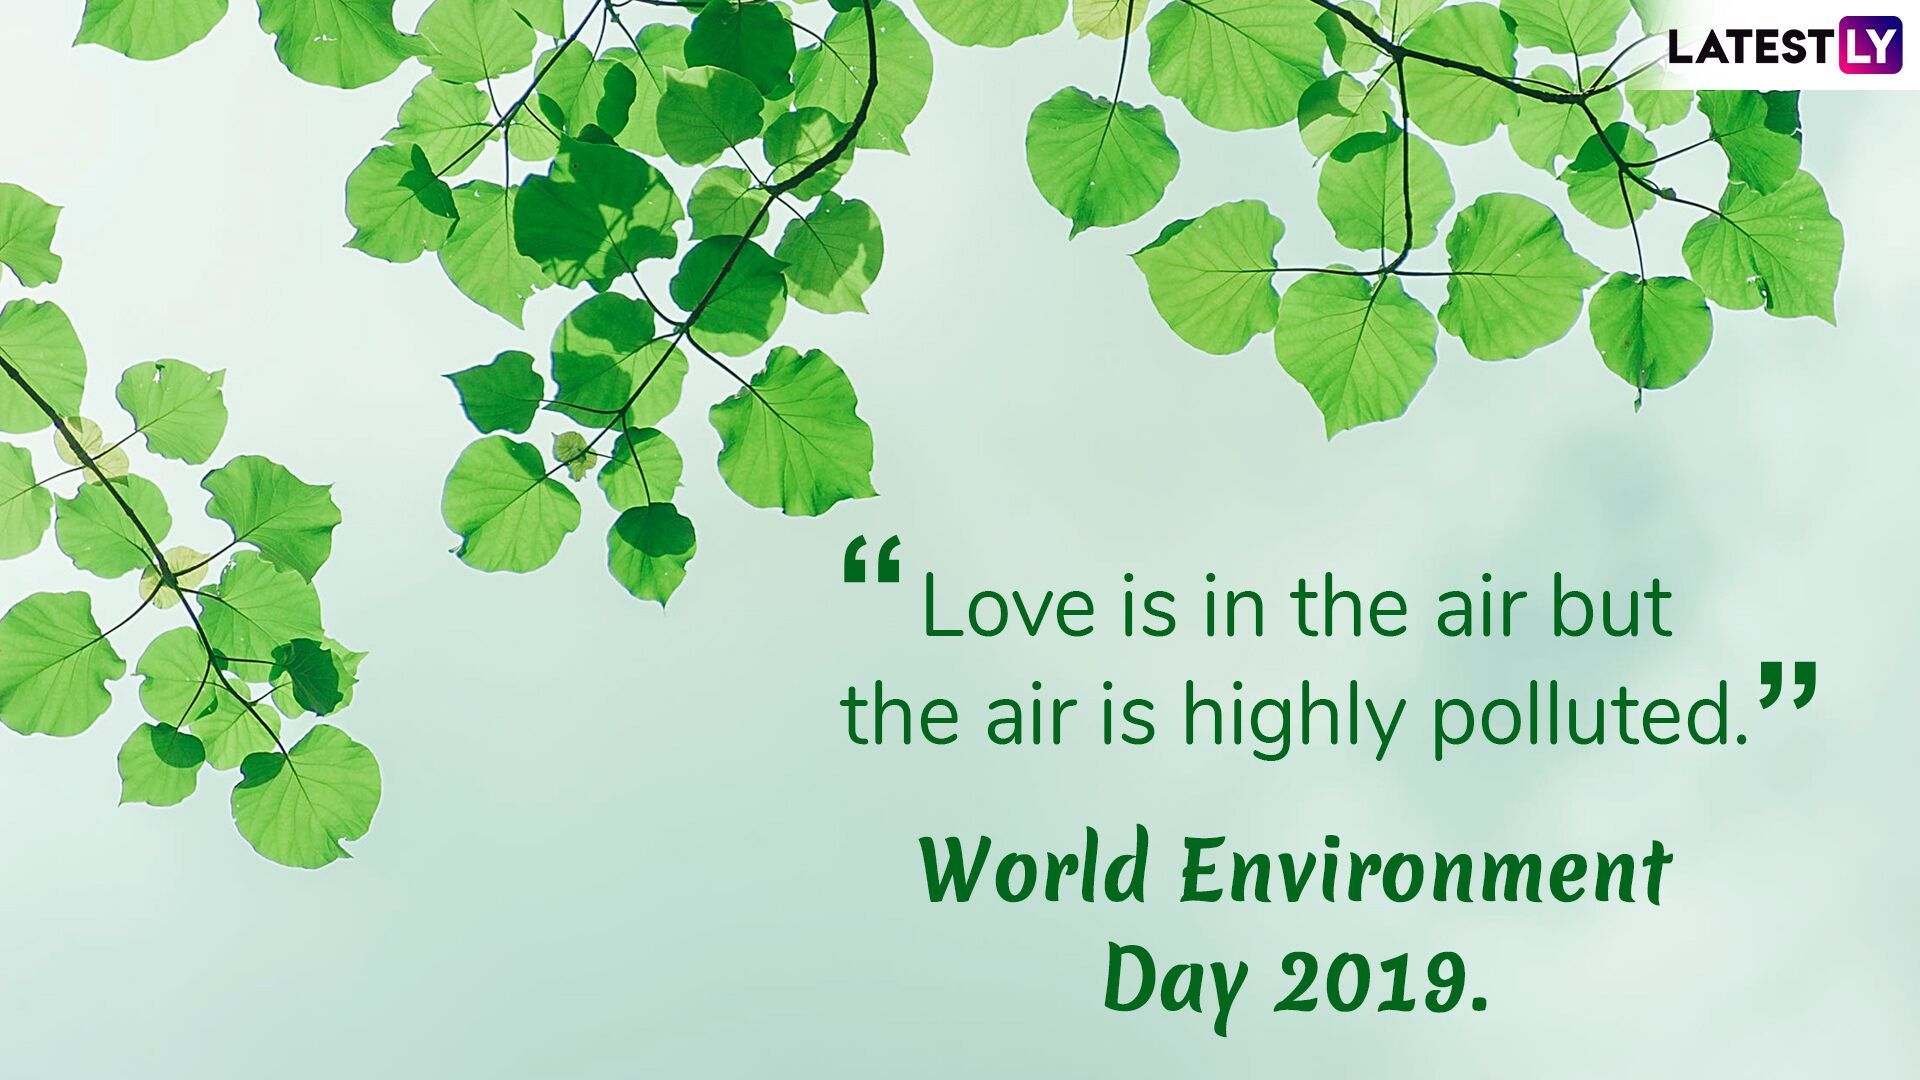 World Environment Day 2019 Greetings And Messages: WhatsApp